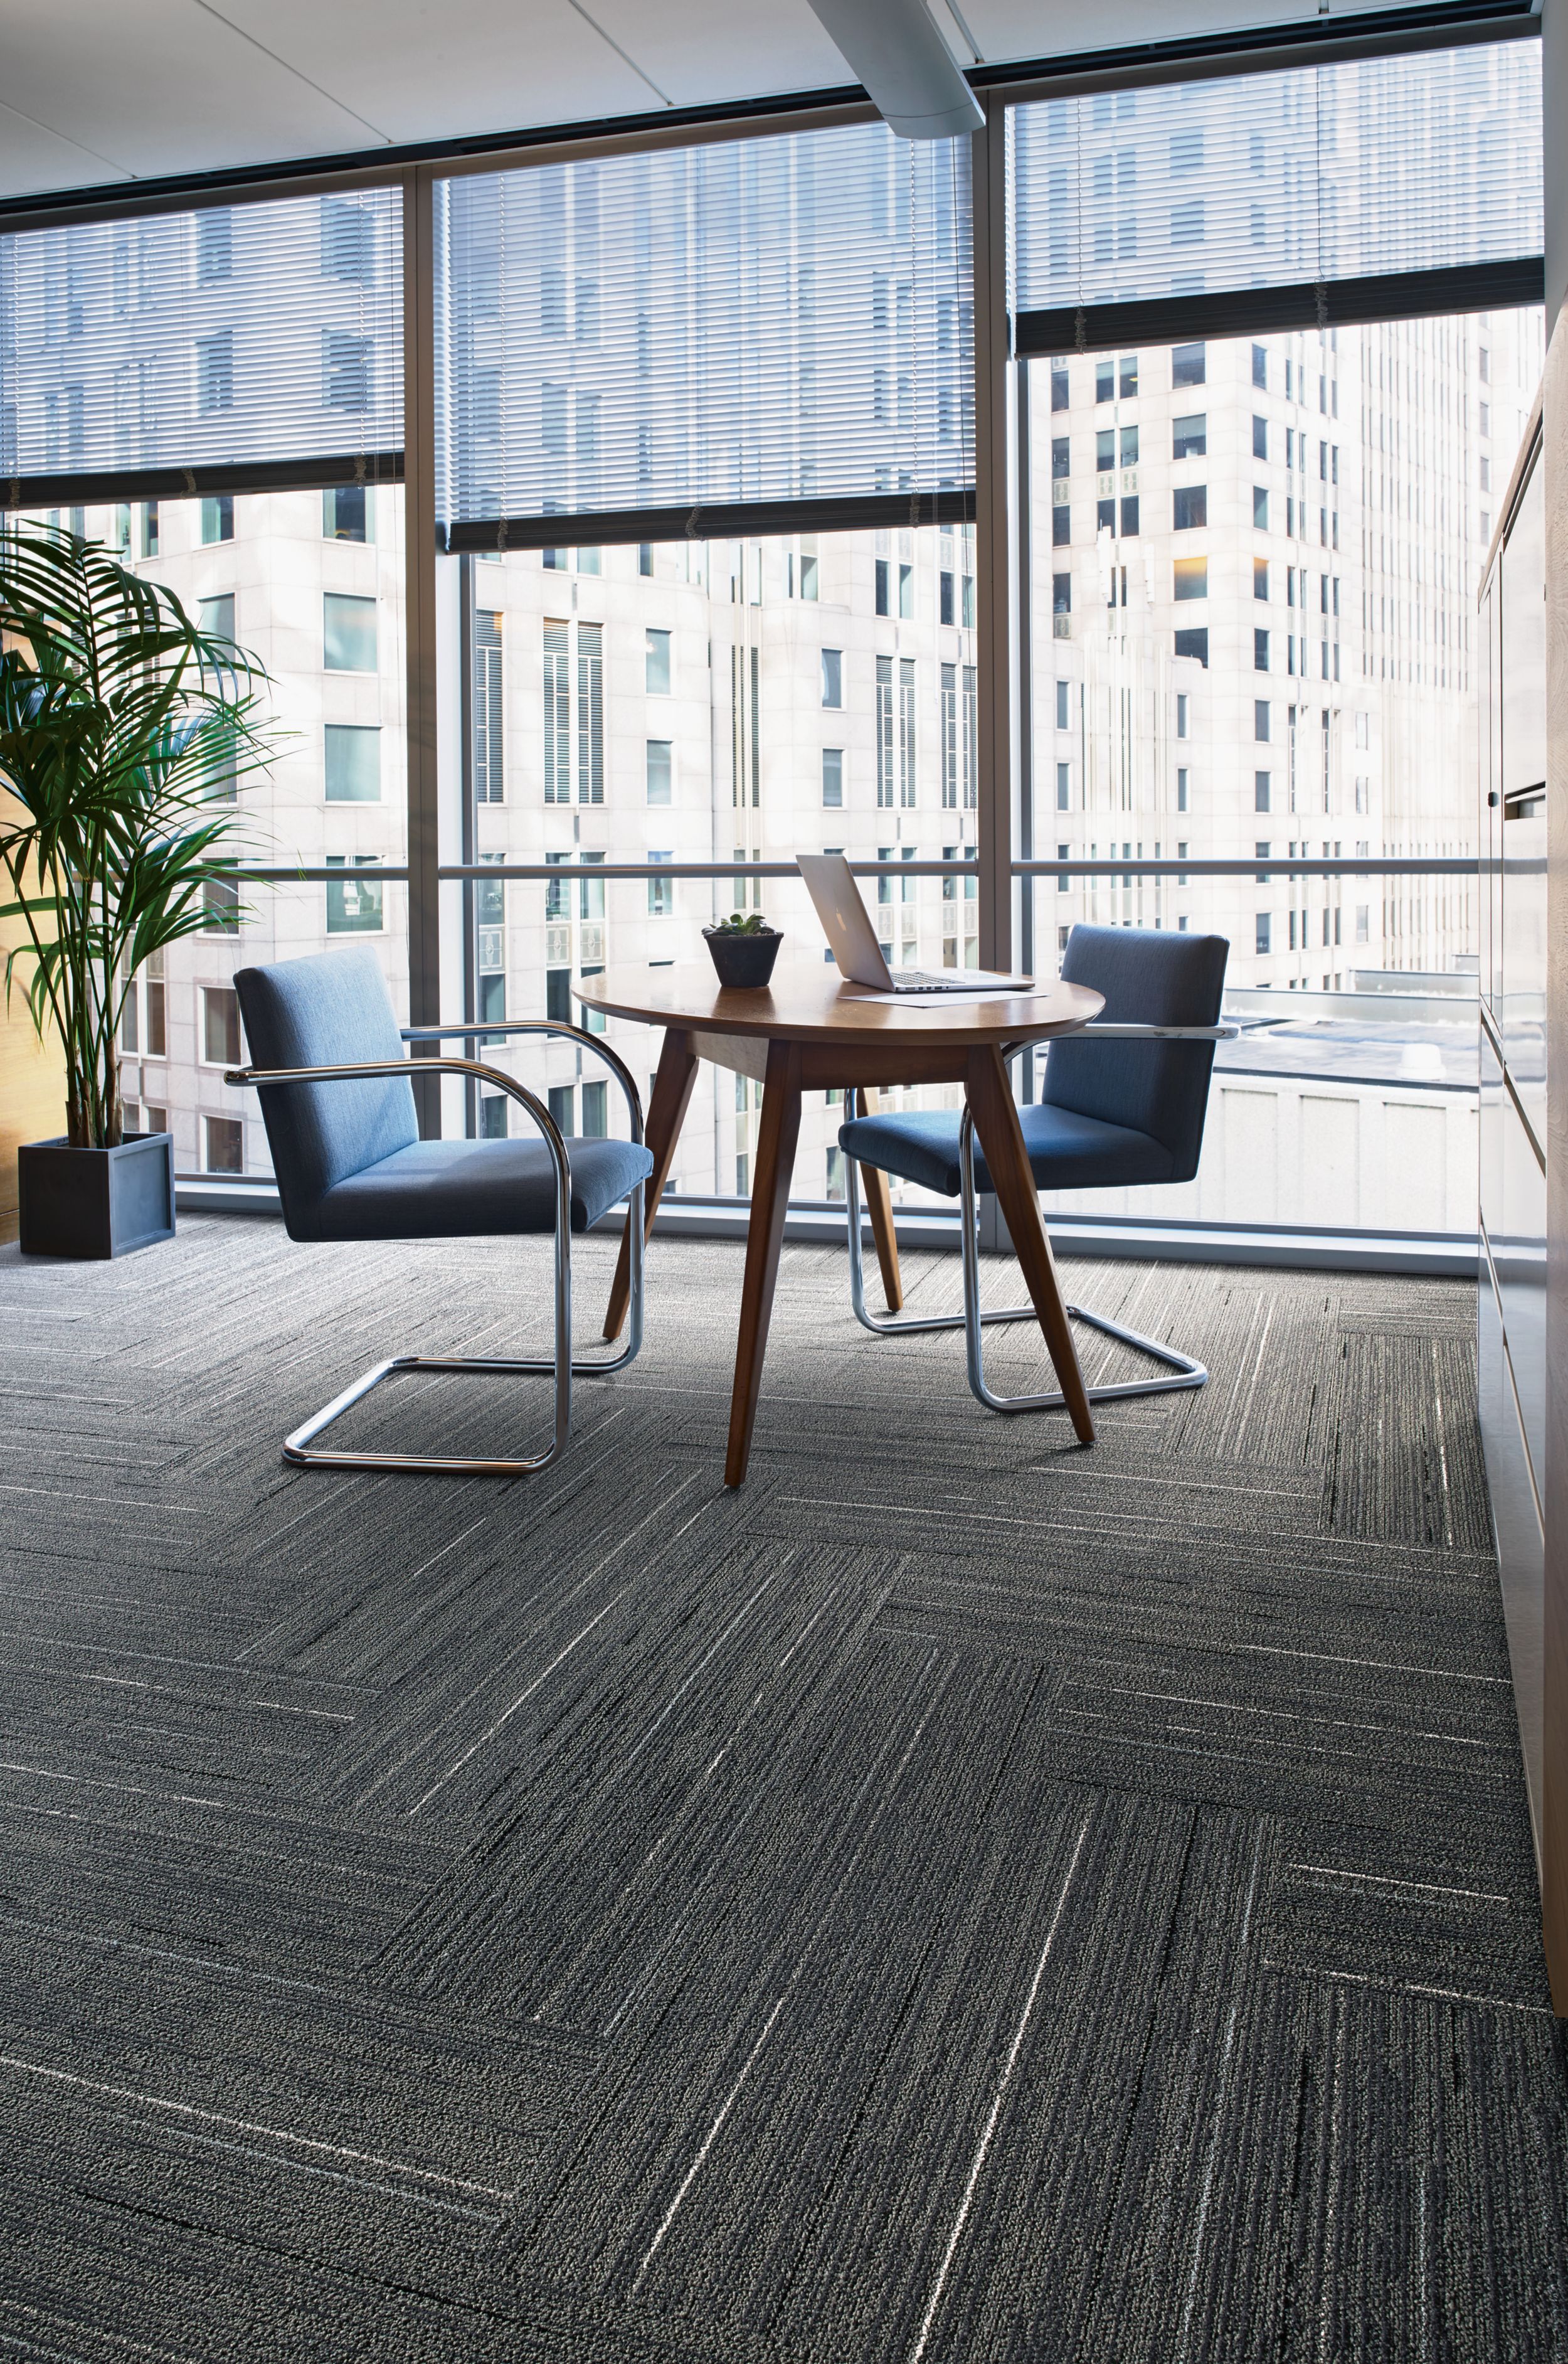 Interface CE172 plank carpet tile in office area with small table and chairs numéro d’image 2